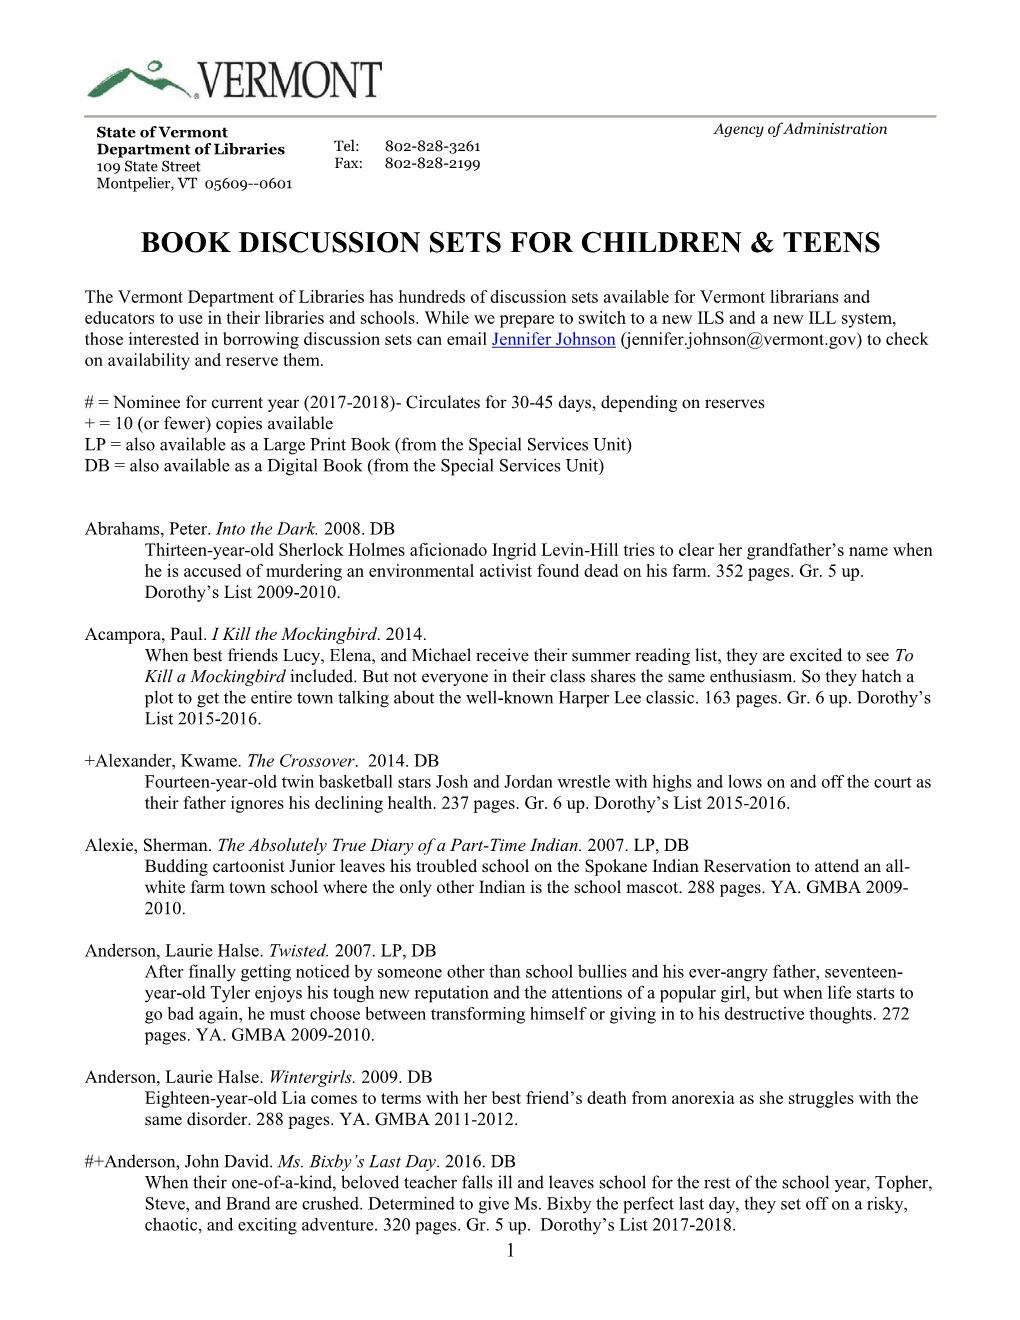 Book Discussion Sets for Children & Teens